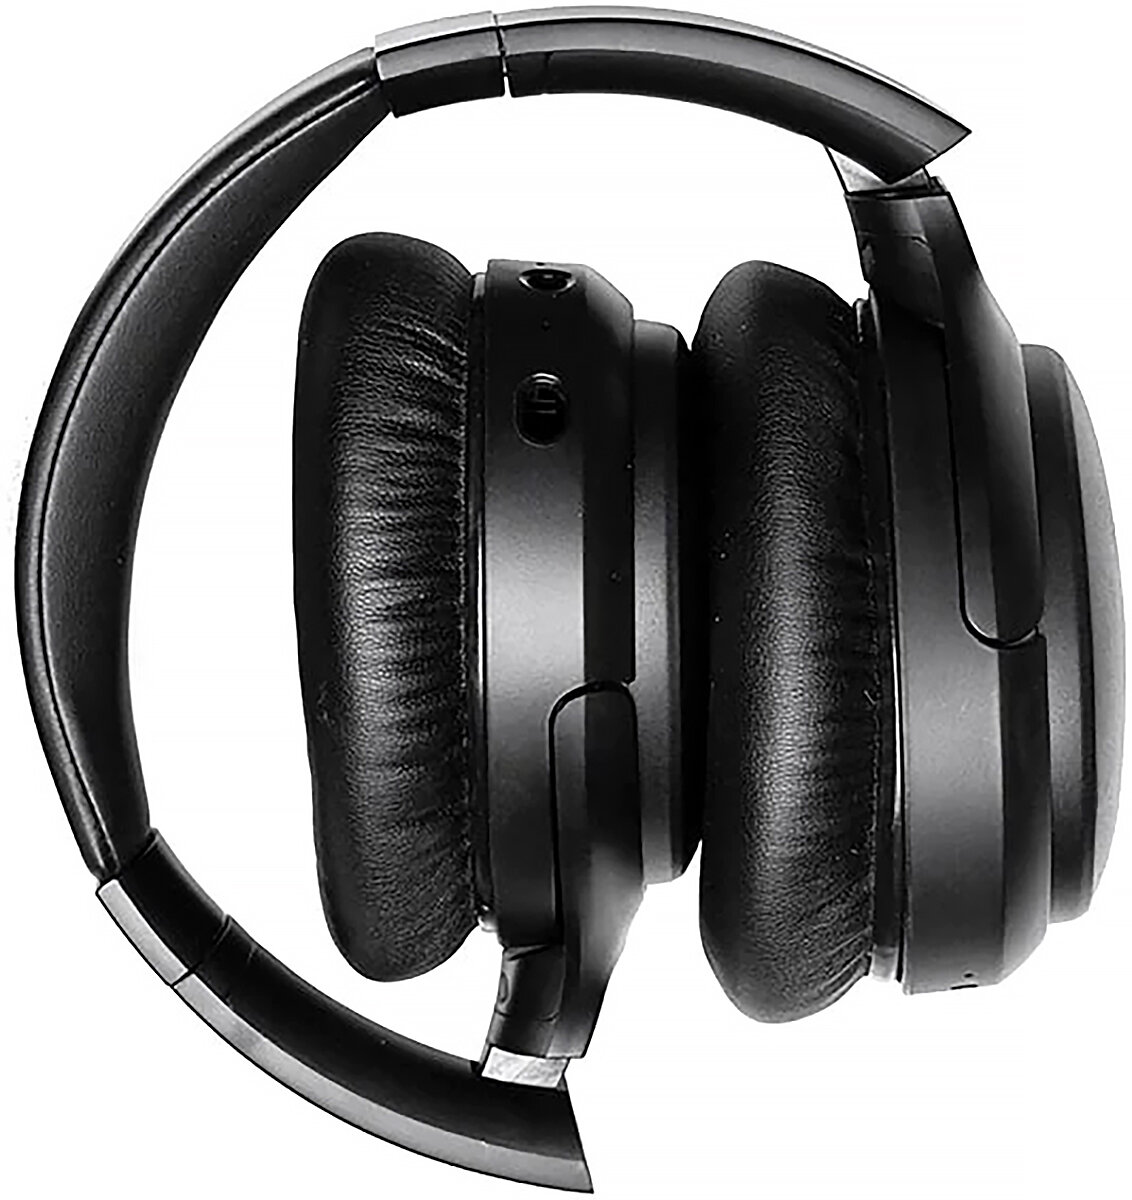 Edifier W820NB Plus vs Soundpeats A6: What is the difference?